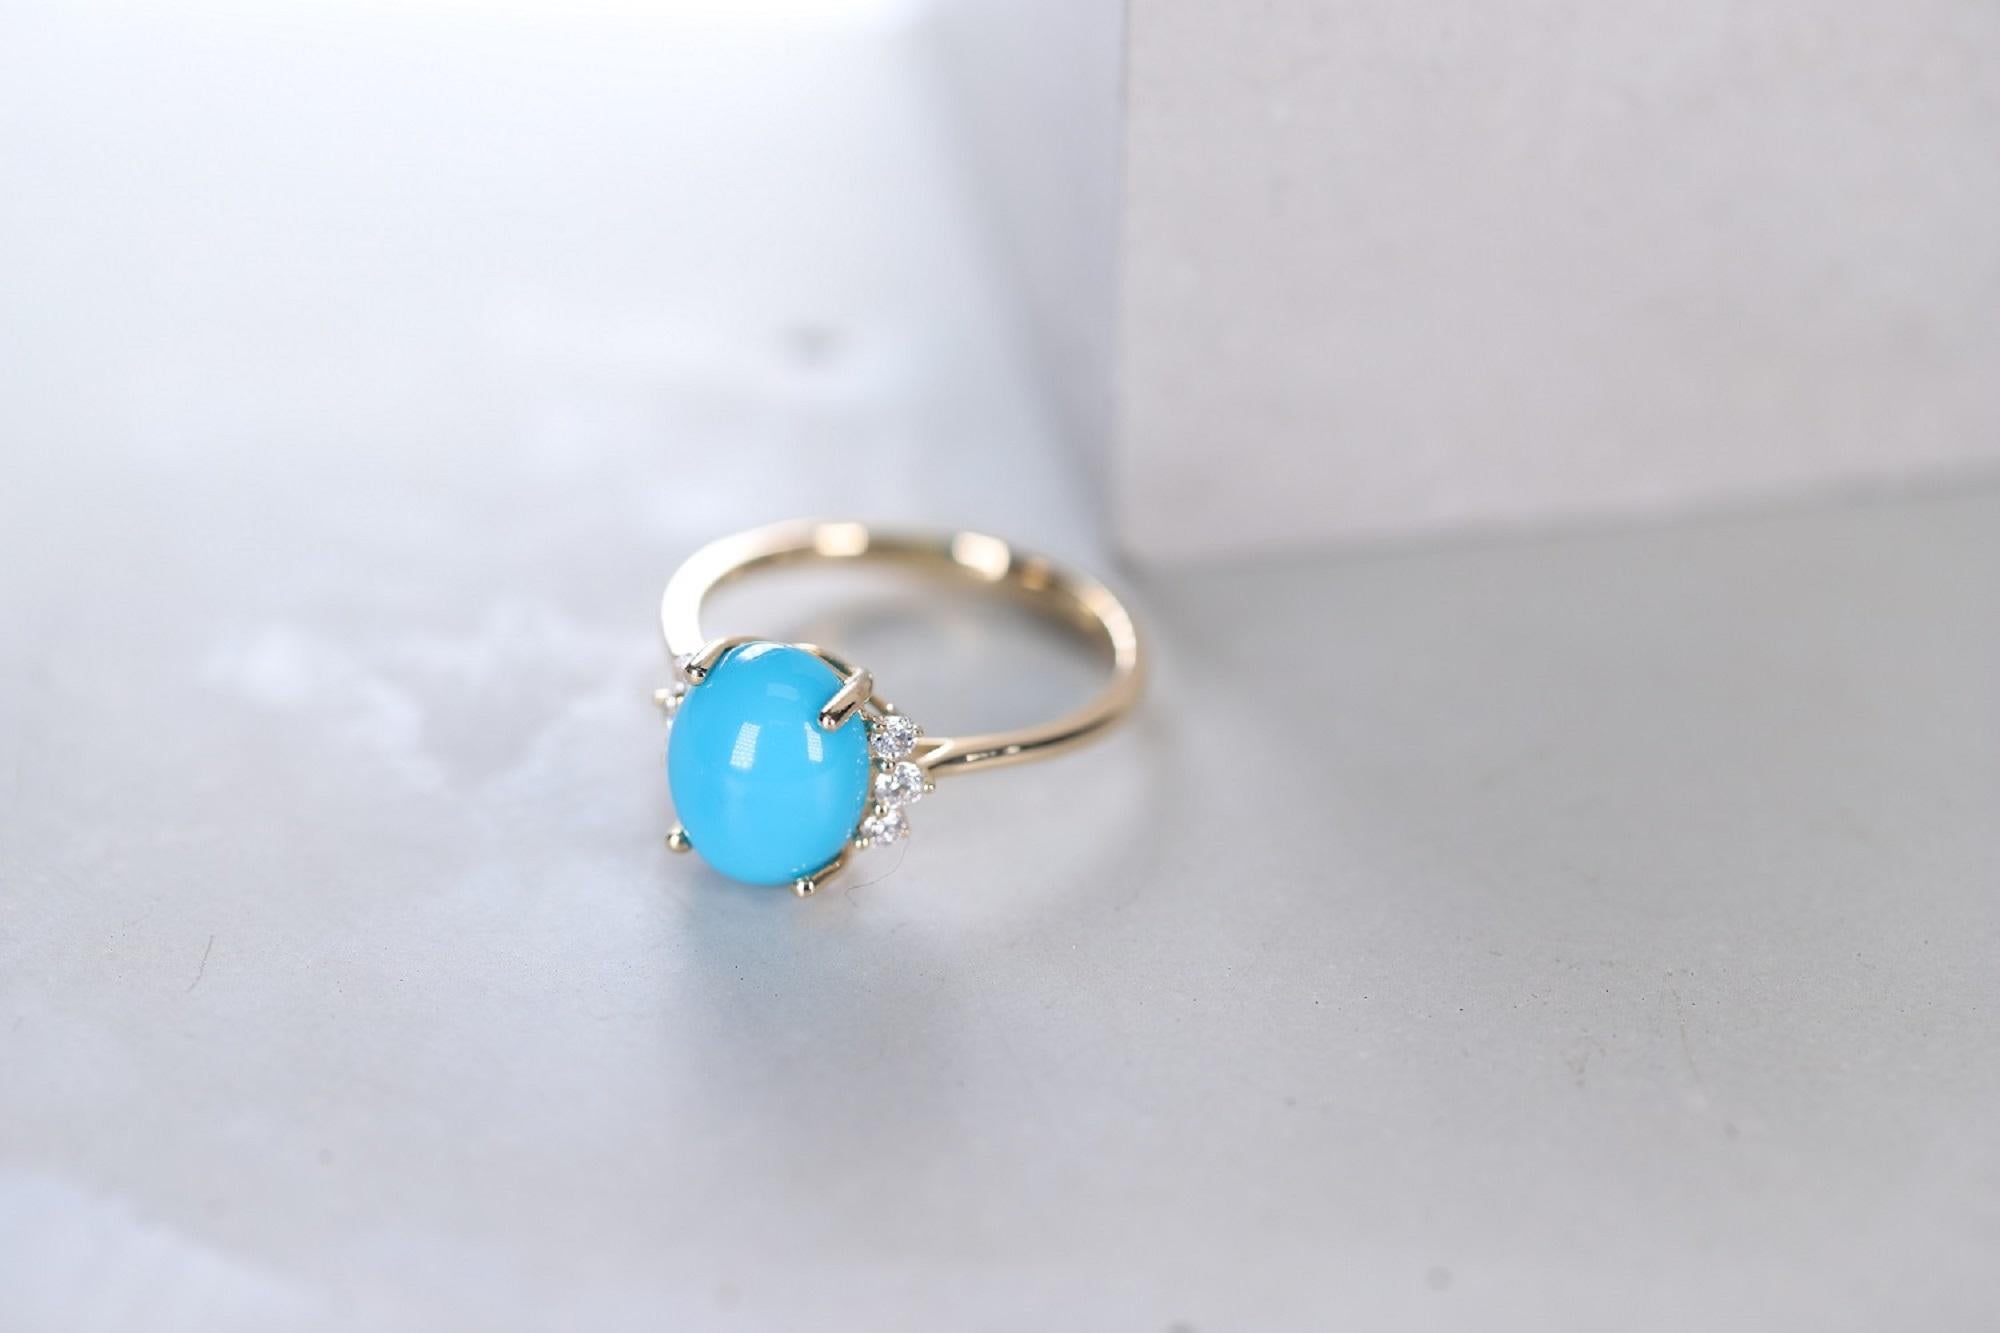 Stunning, timeless and classy eternity Unique Ring. Decorate yourself in luxury with this Gin & Grace Ring. The 14k Yellow Gold jewelry boasts Oval-cab Prong Setting Turquoise (1 pcs) 2.97 Carat, along with Round cut White Diamond (6 Pcs) 0.15 Carat